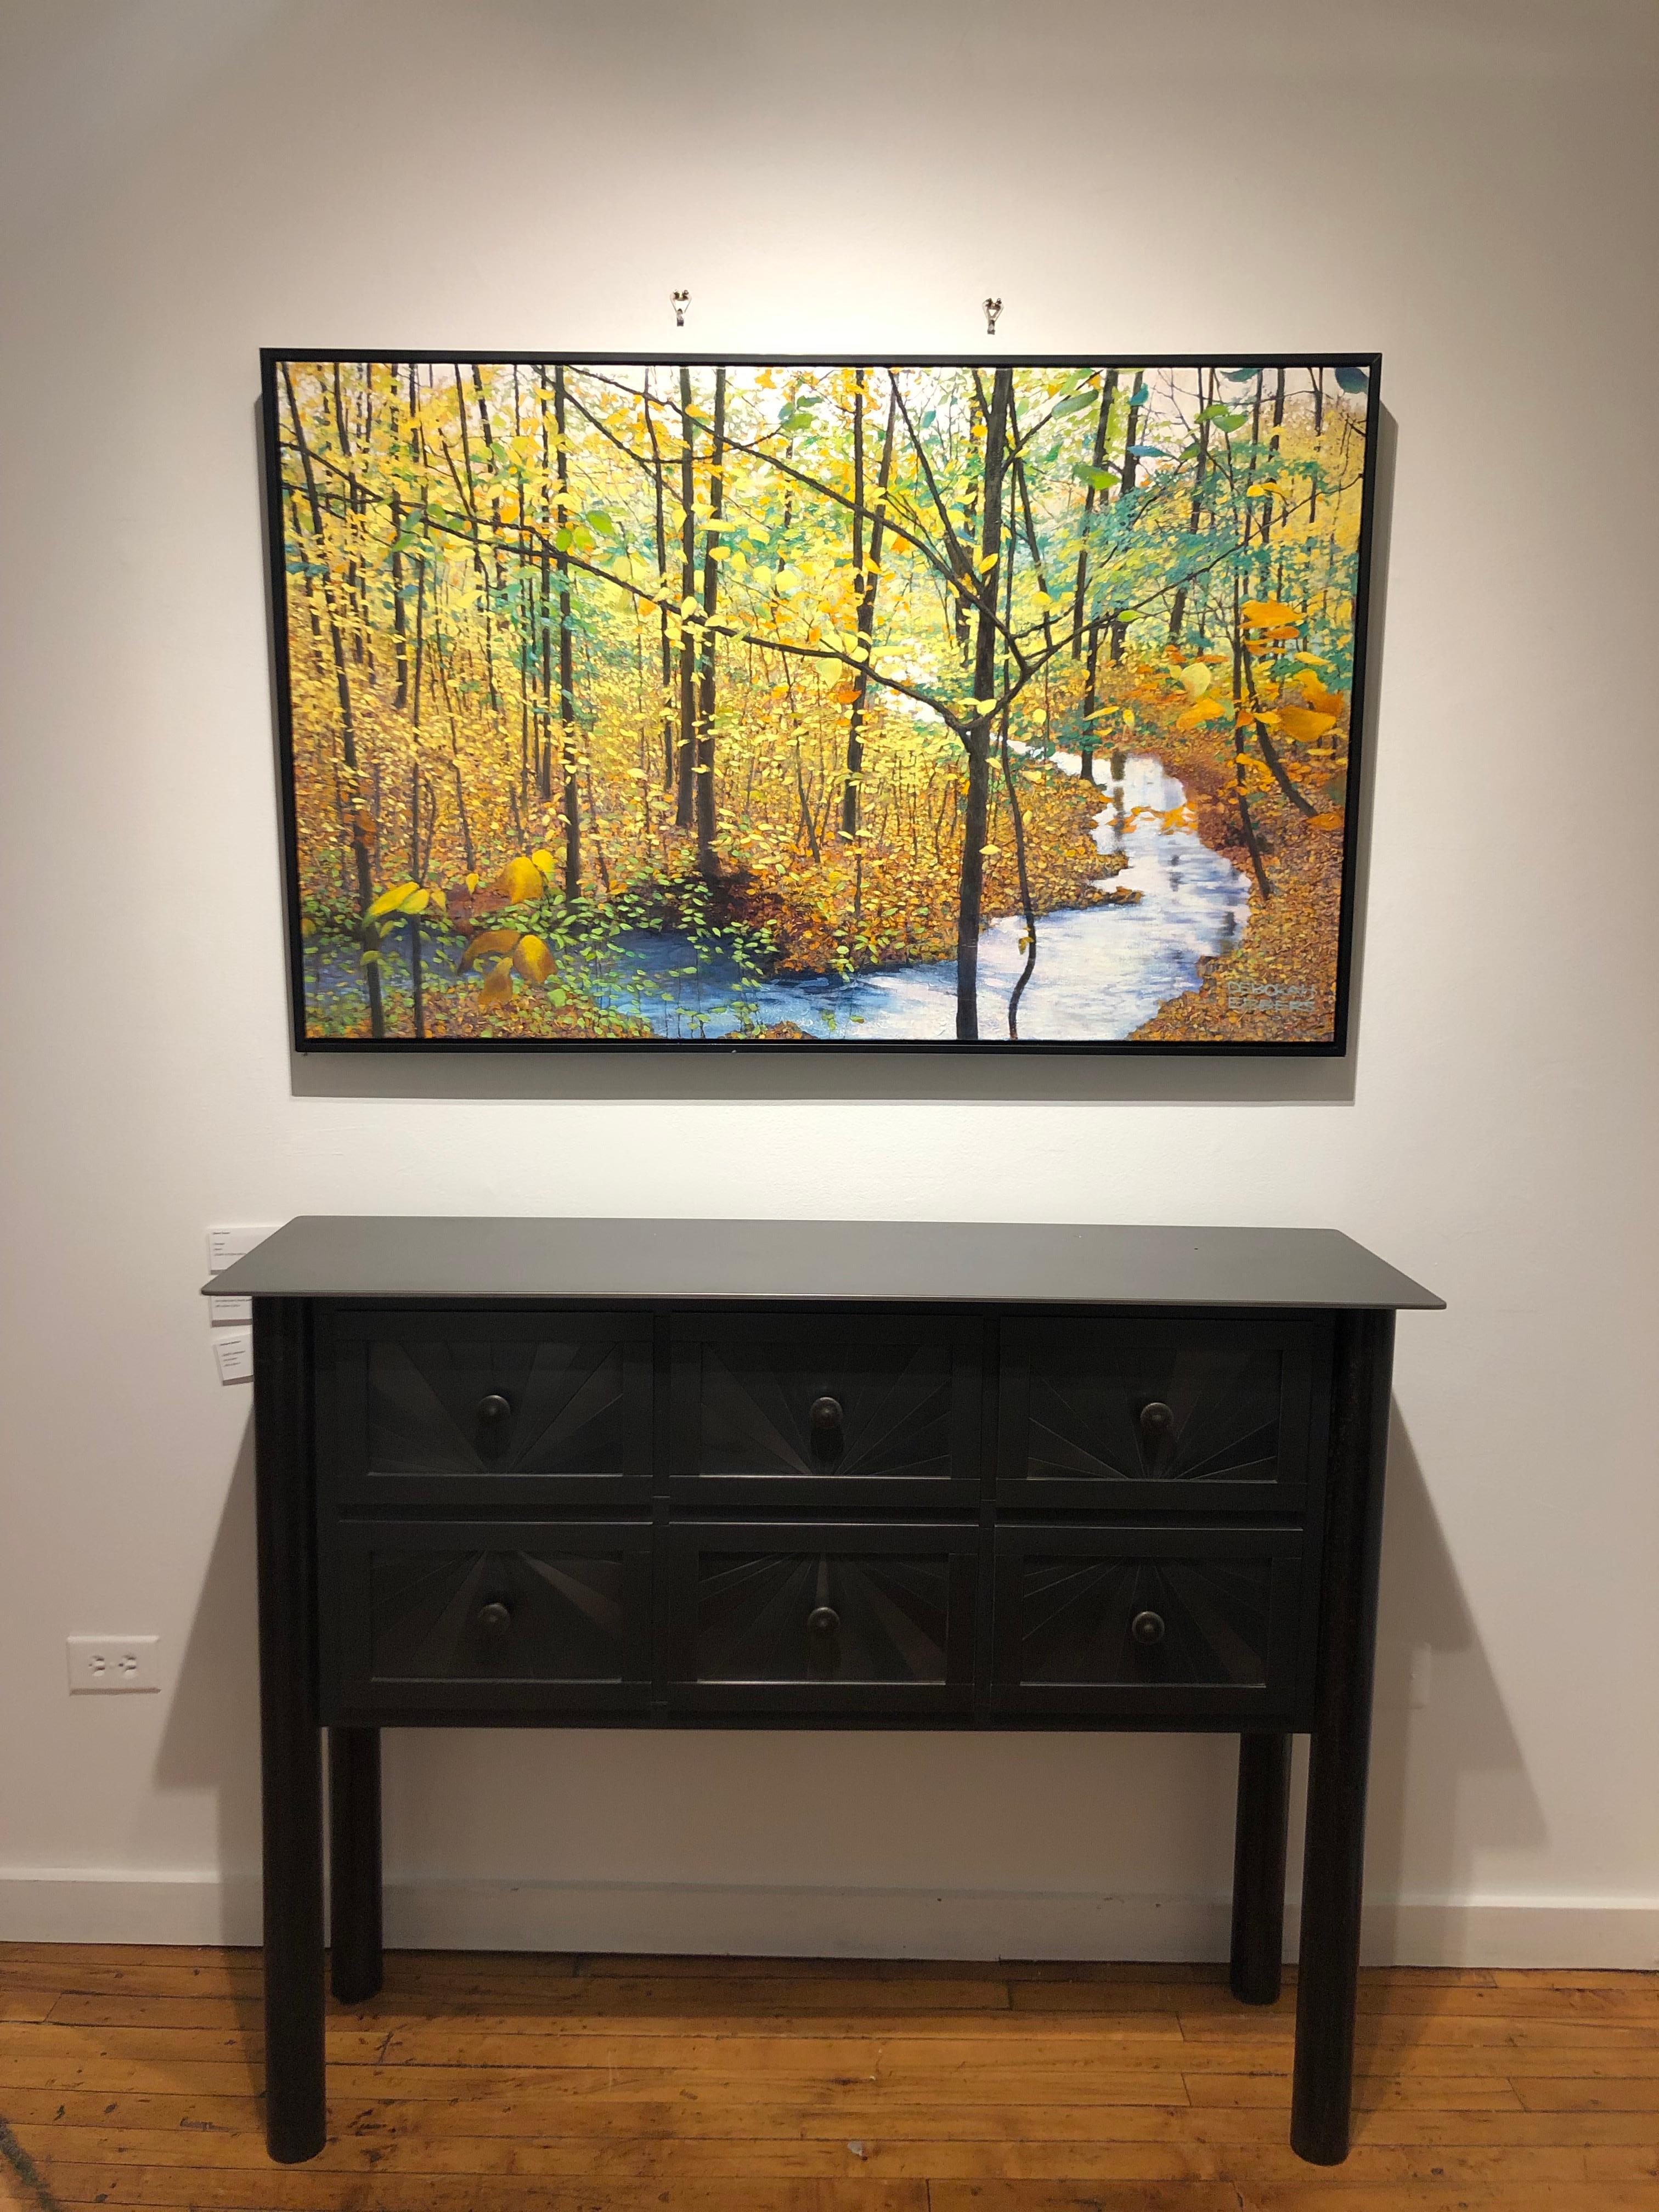 Along Lake Michigan's northern shore, the setting sun casts its golden shimmer into the woods.  The trees and leaves  come alive with radiance in this original oil painting by Deborah Ebbers.  This pristine, secluded spot near the artist's home